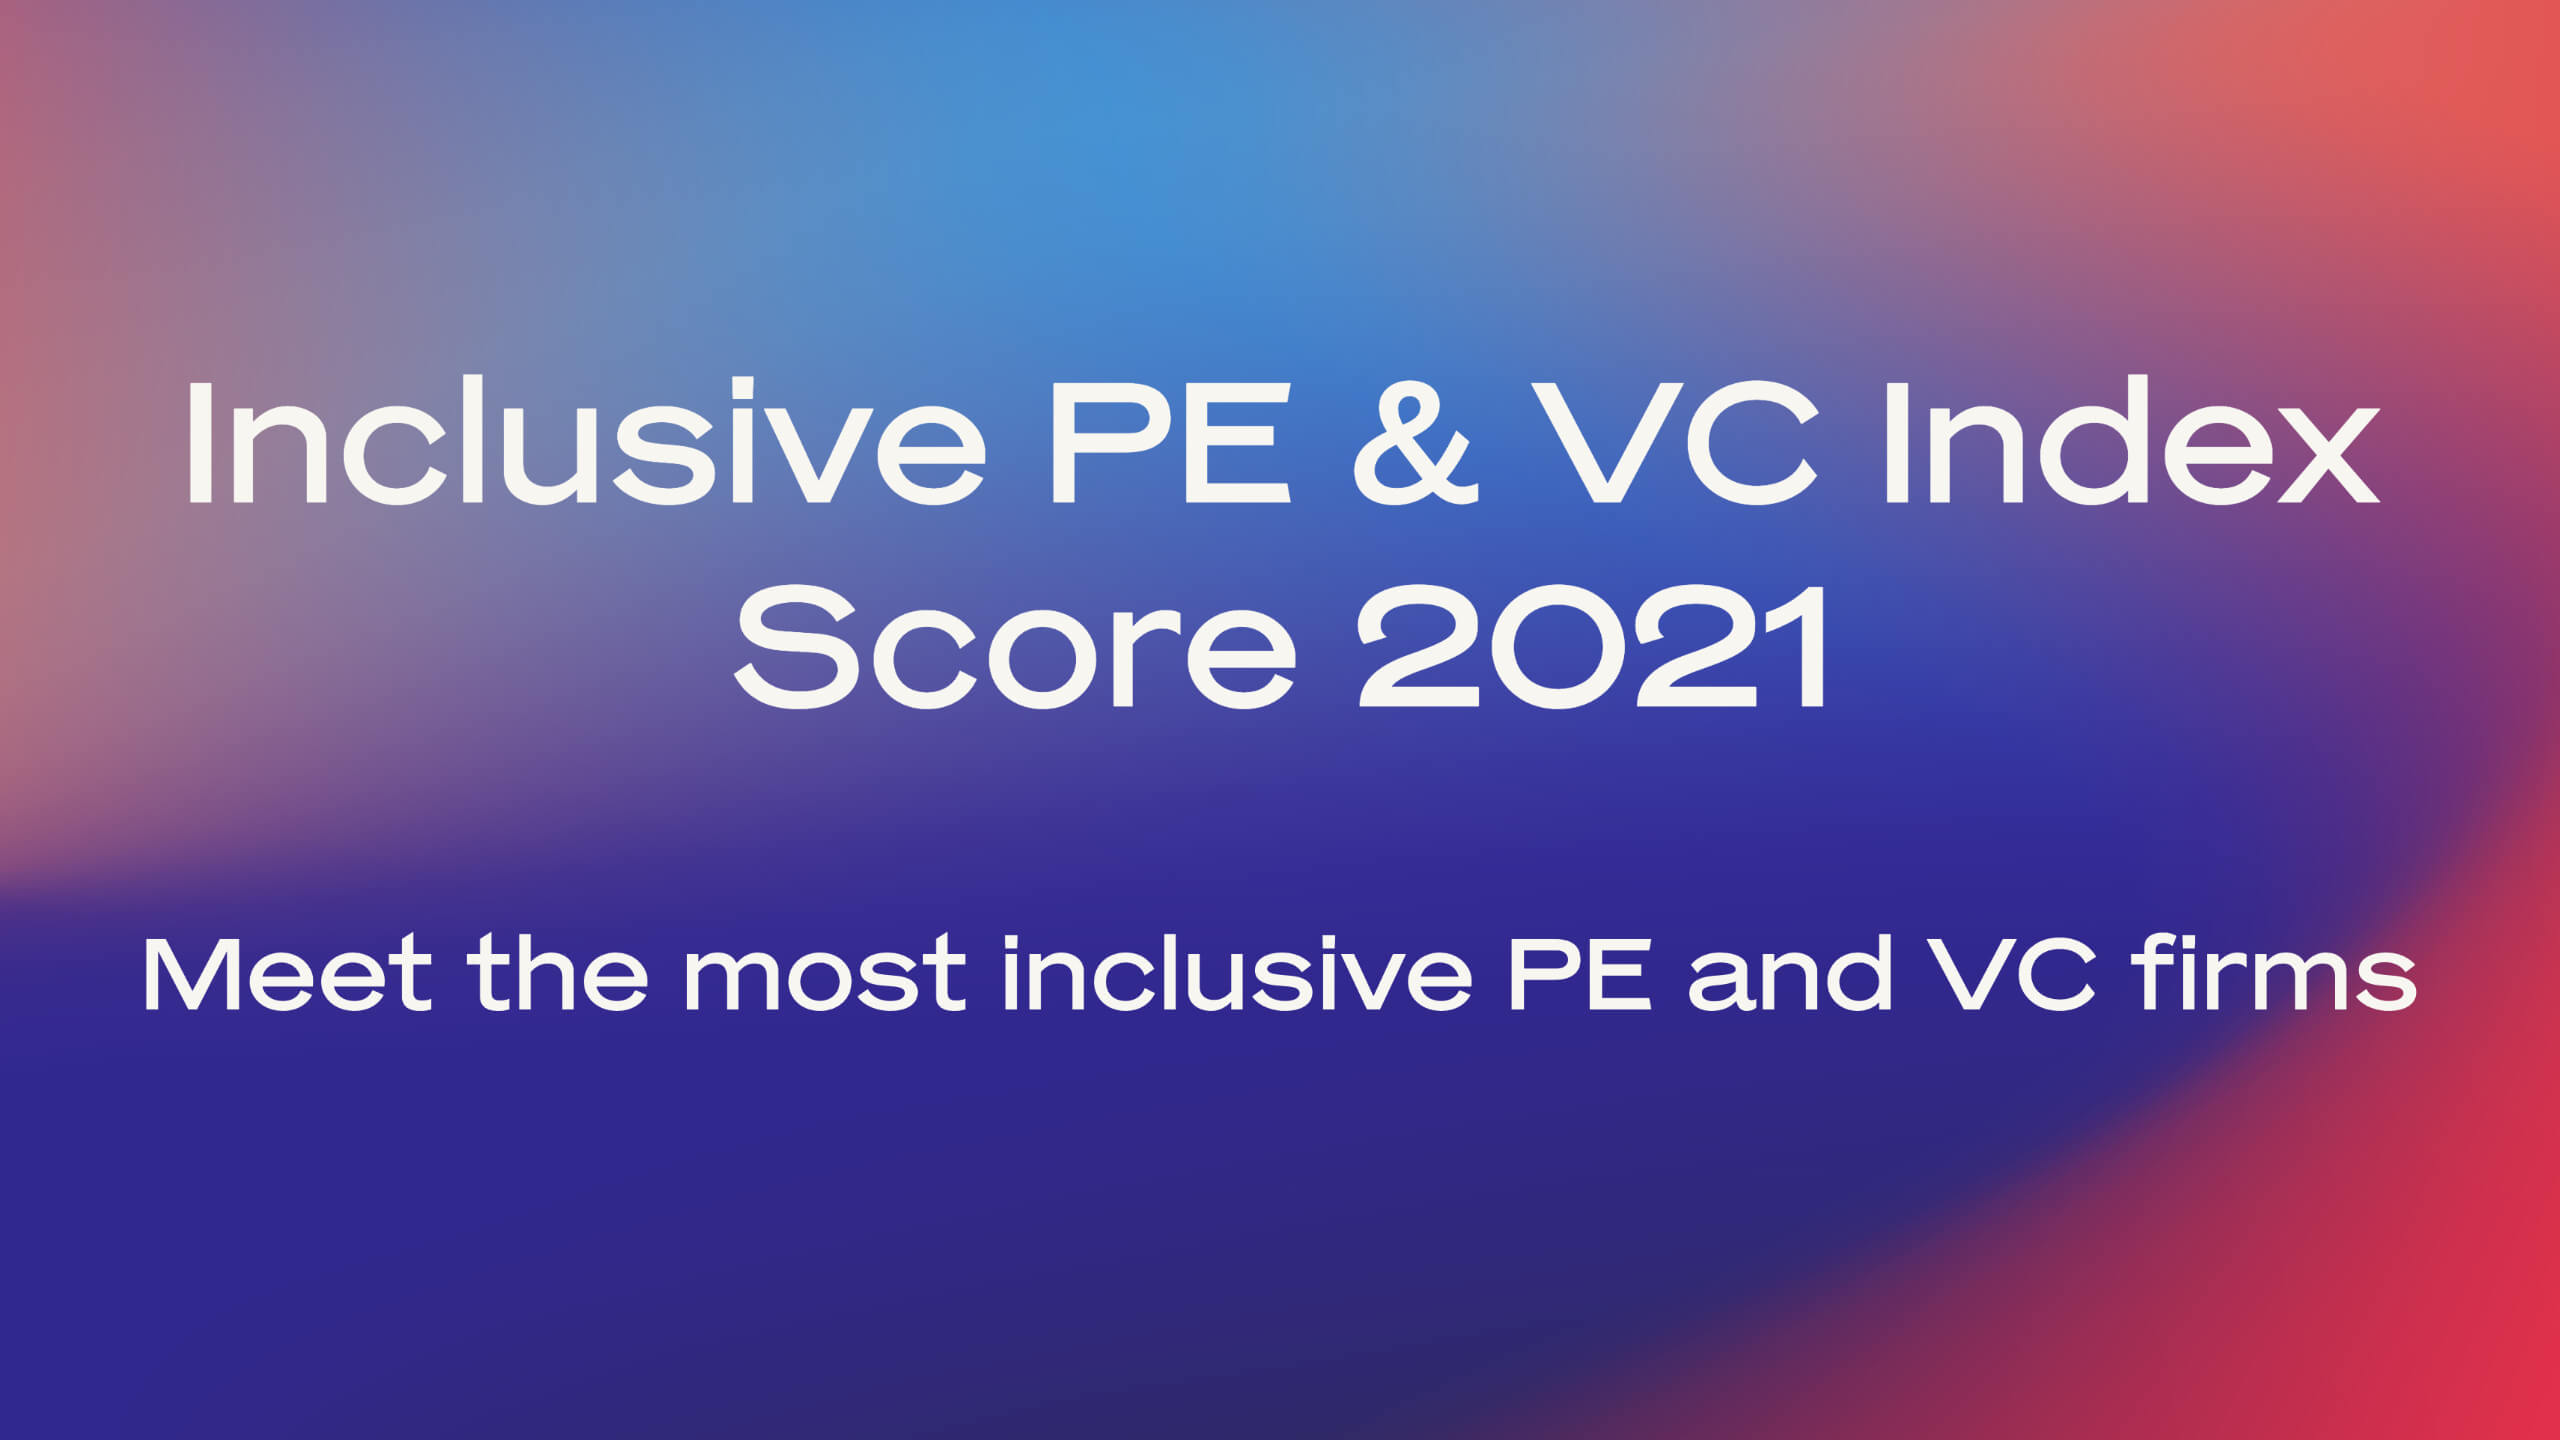 equality-group-inclusive-pe-vc-index-2021-thumb